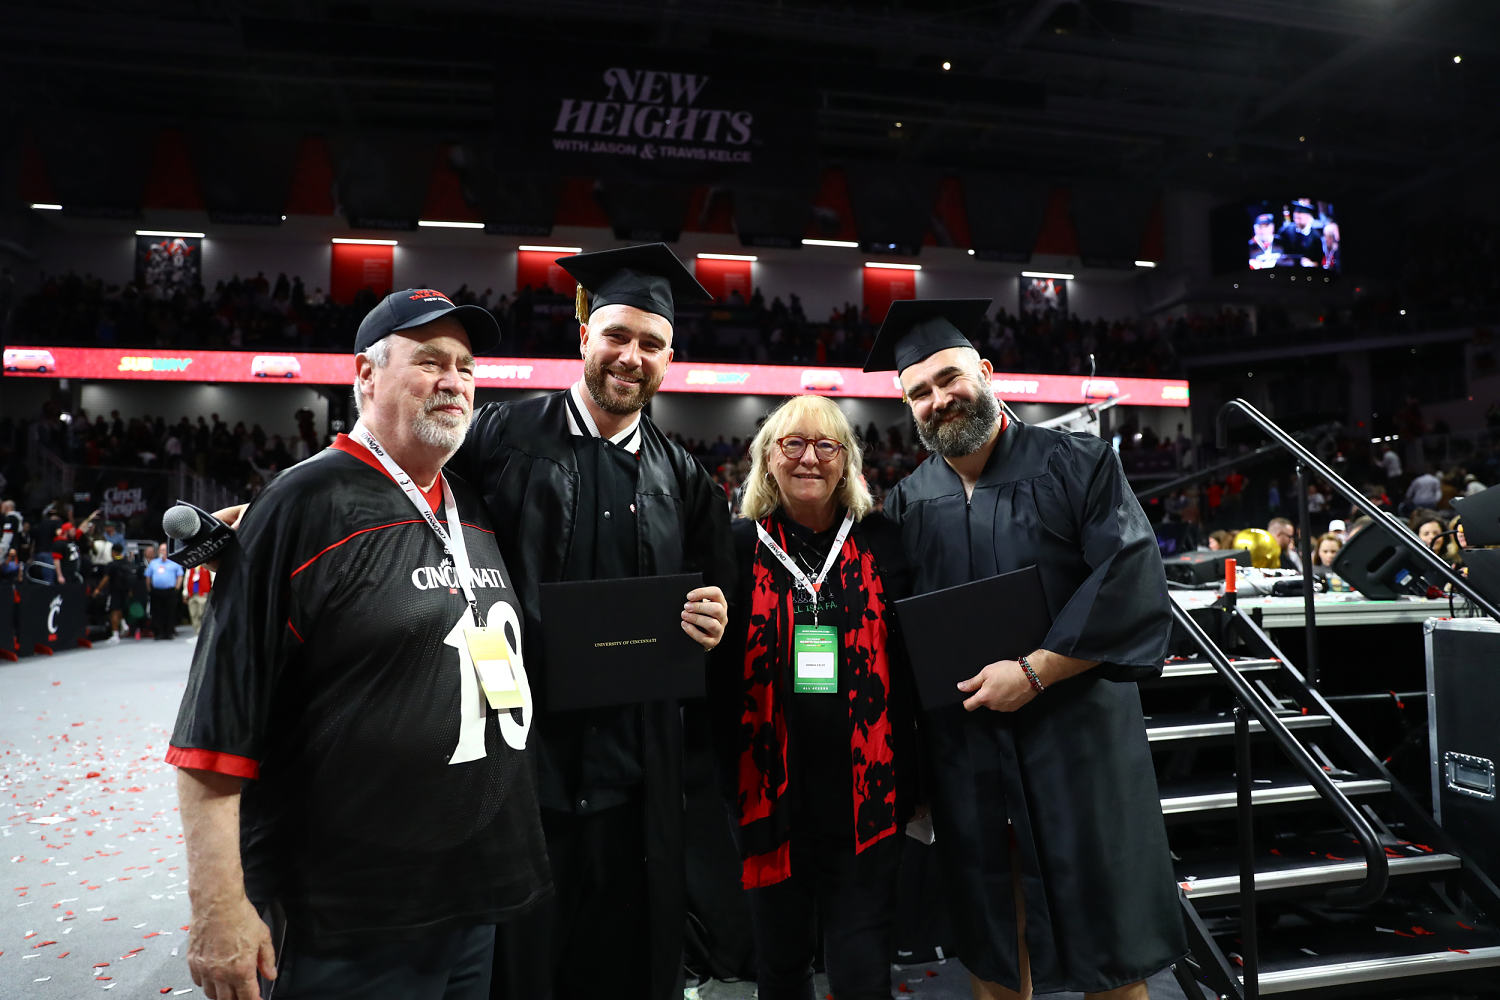 Travis and Jason Kelce graduated from college during a surprise ceremony in Cincinnati